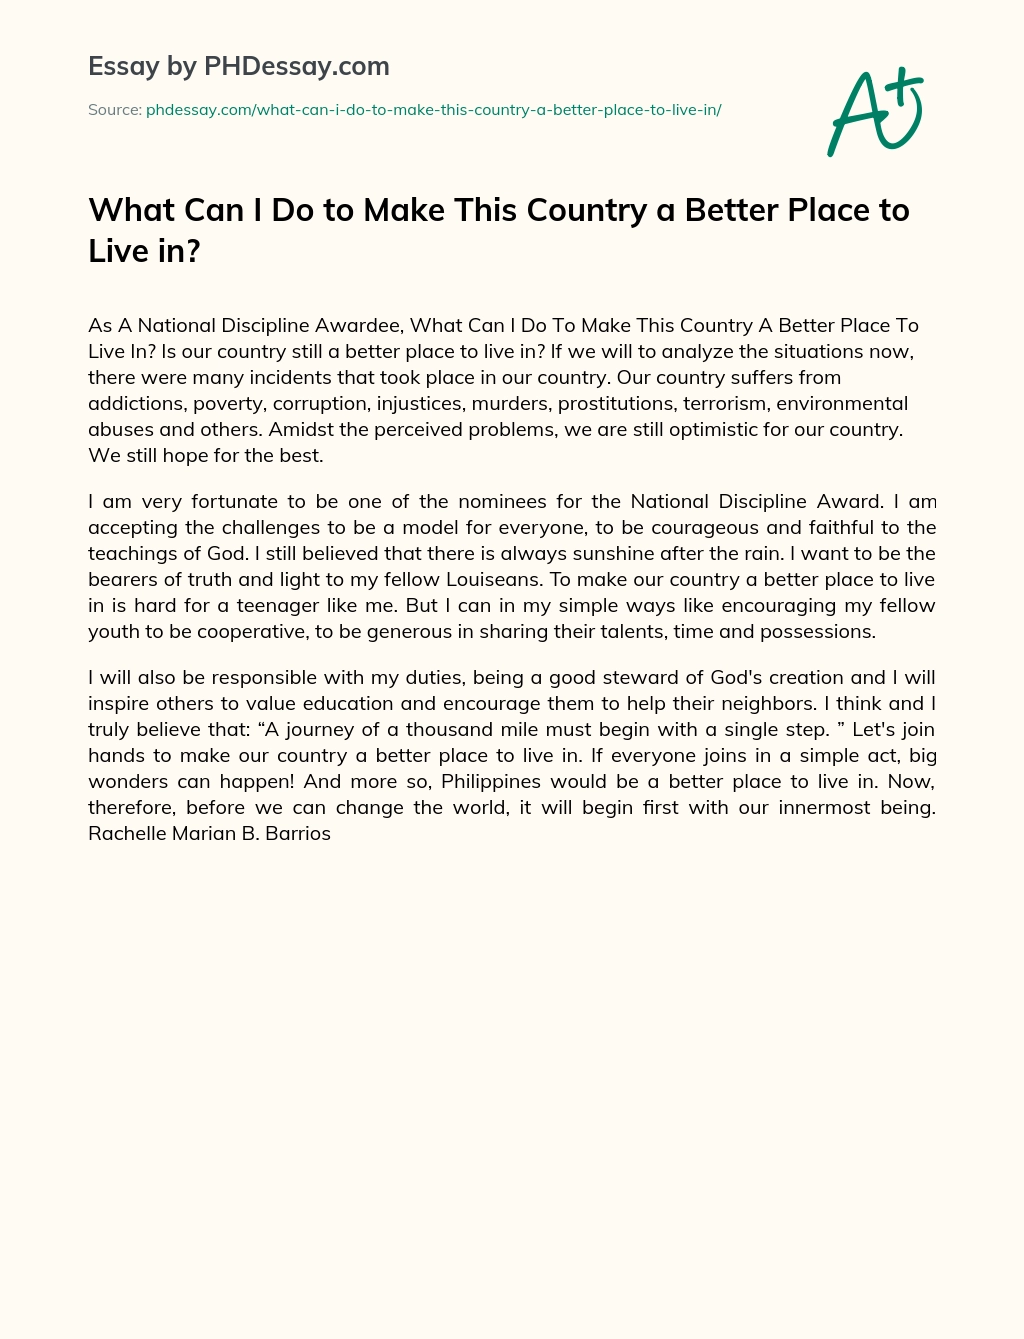 What Can I Do to Make This Country a Better Place to Live in? essay